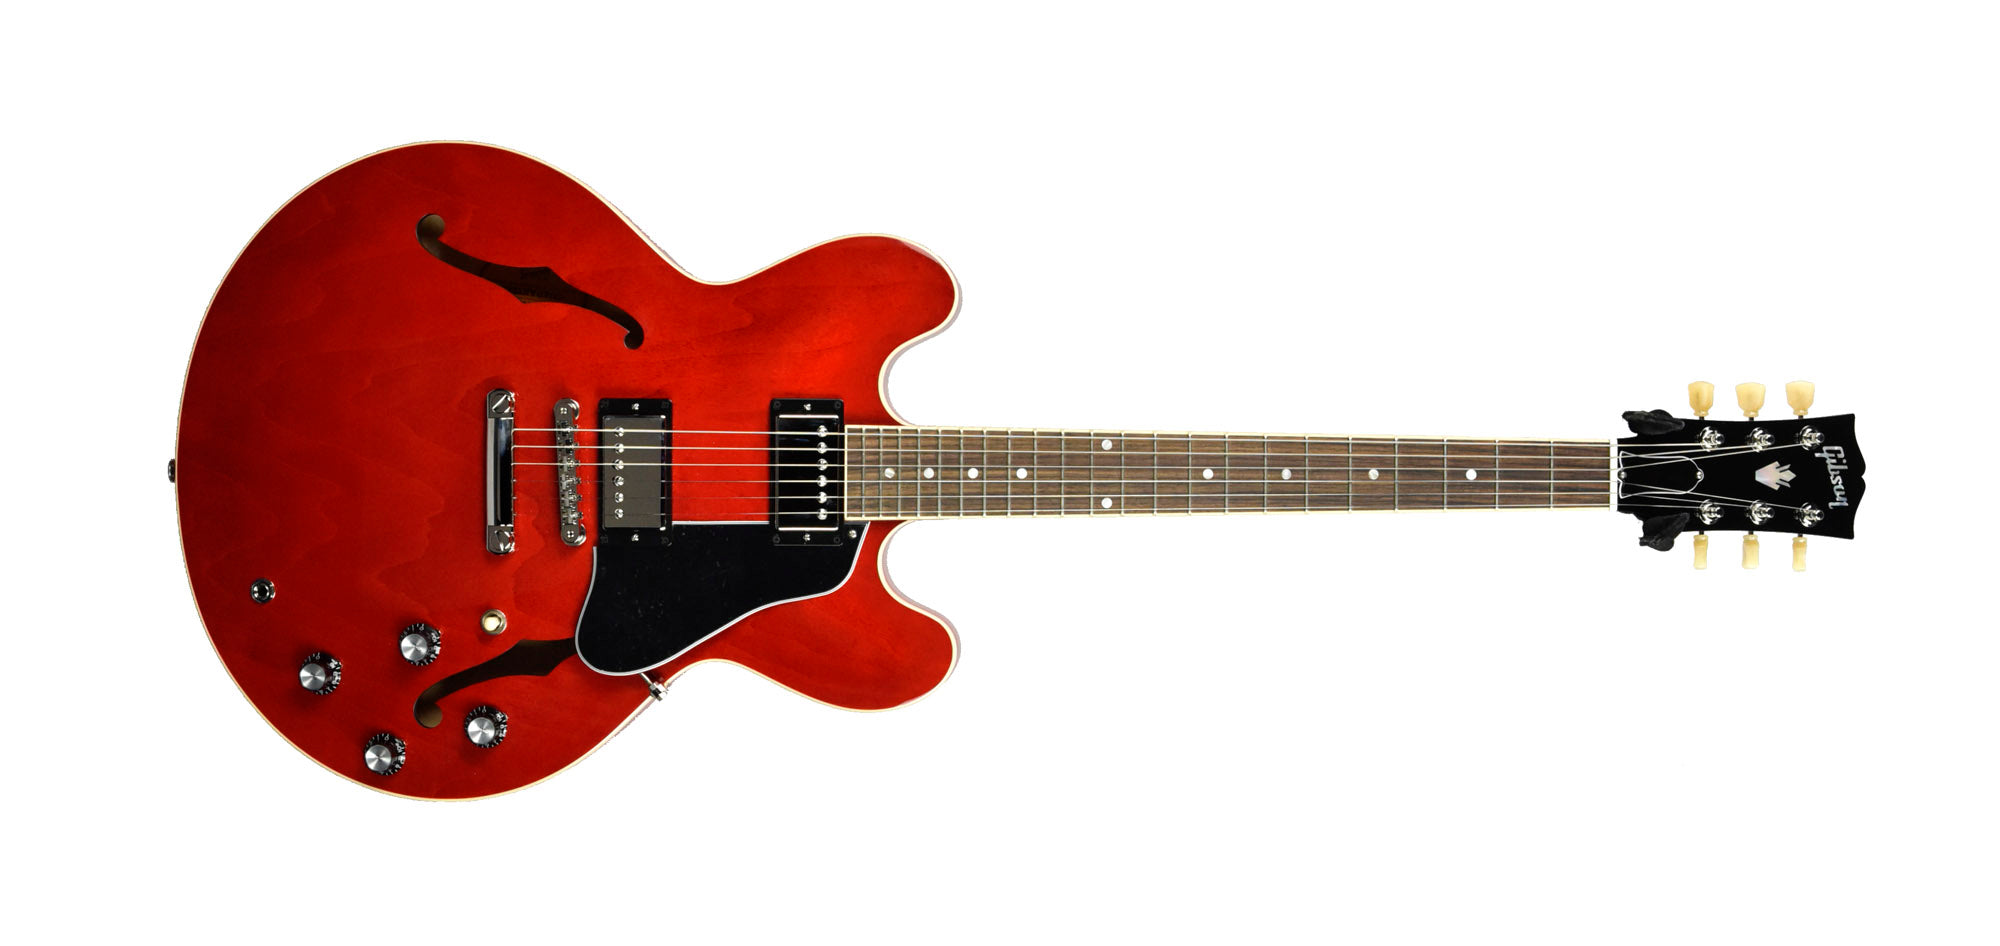 Gibson ES-335 Semi-Hollow Body Electric Guitar in Sixties Cherry